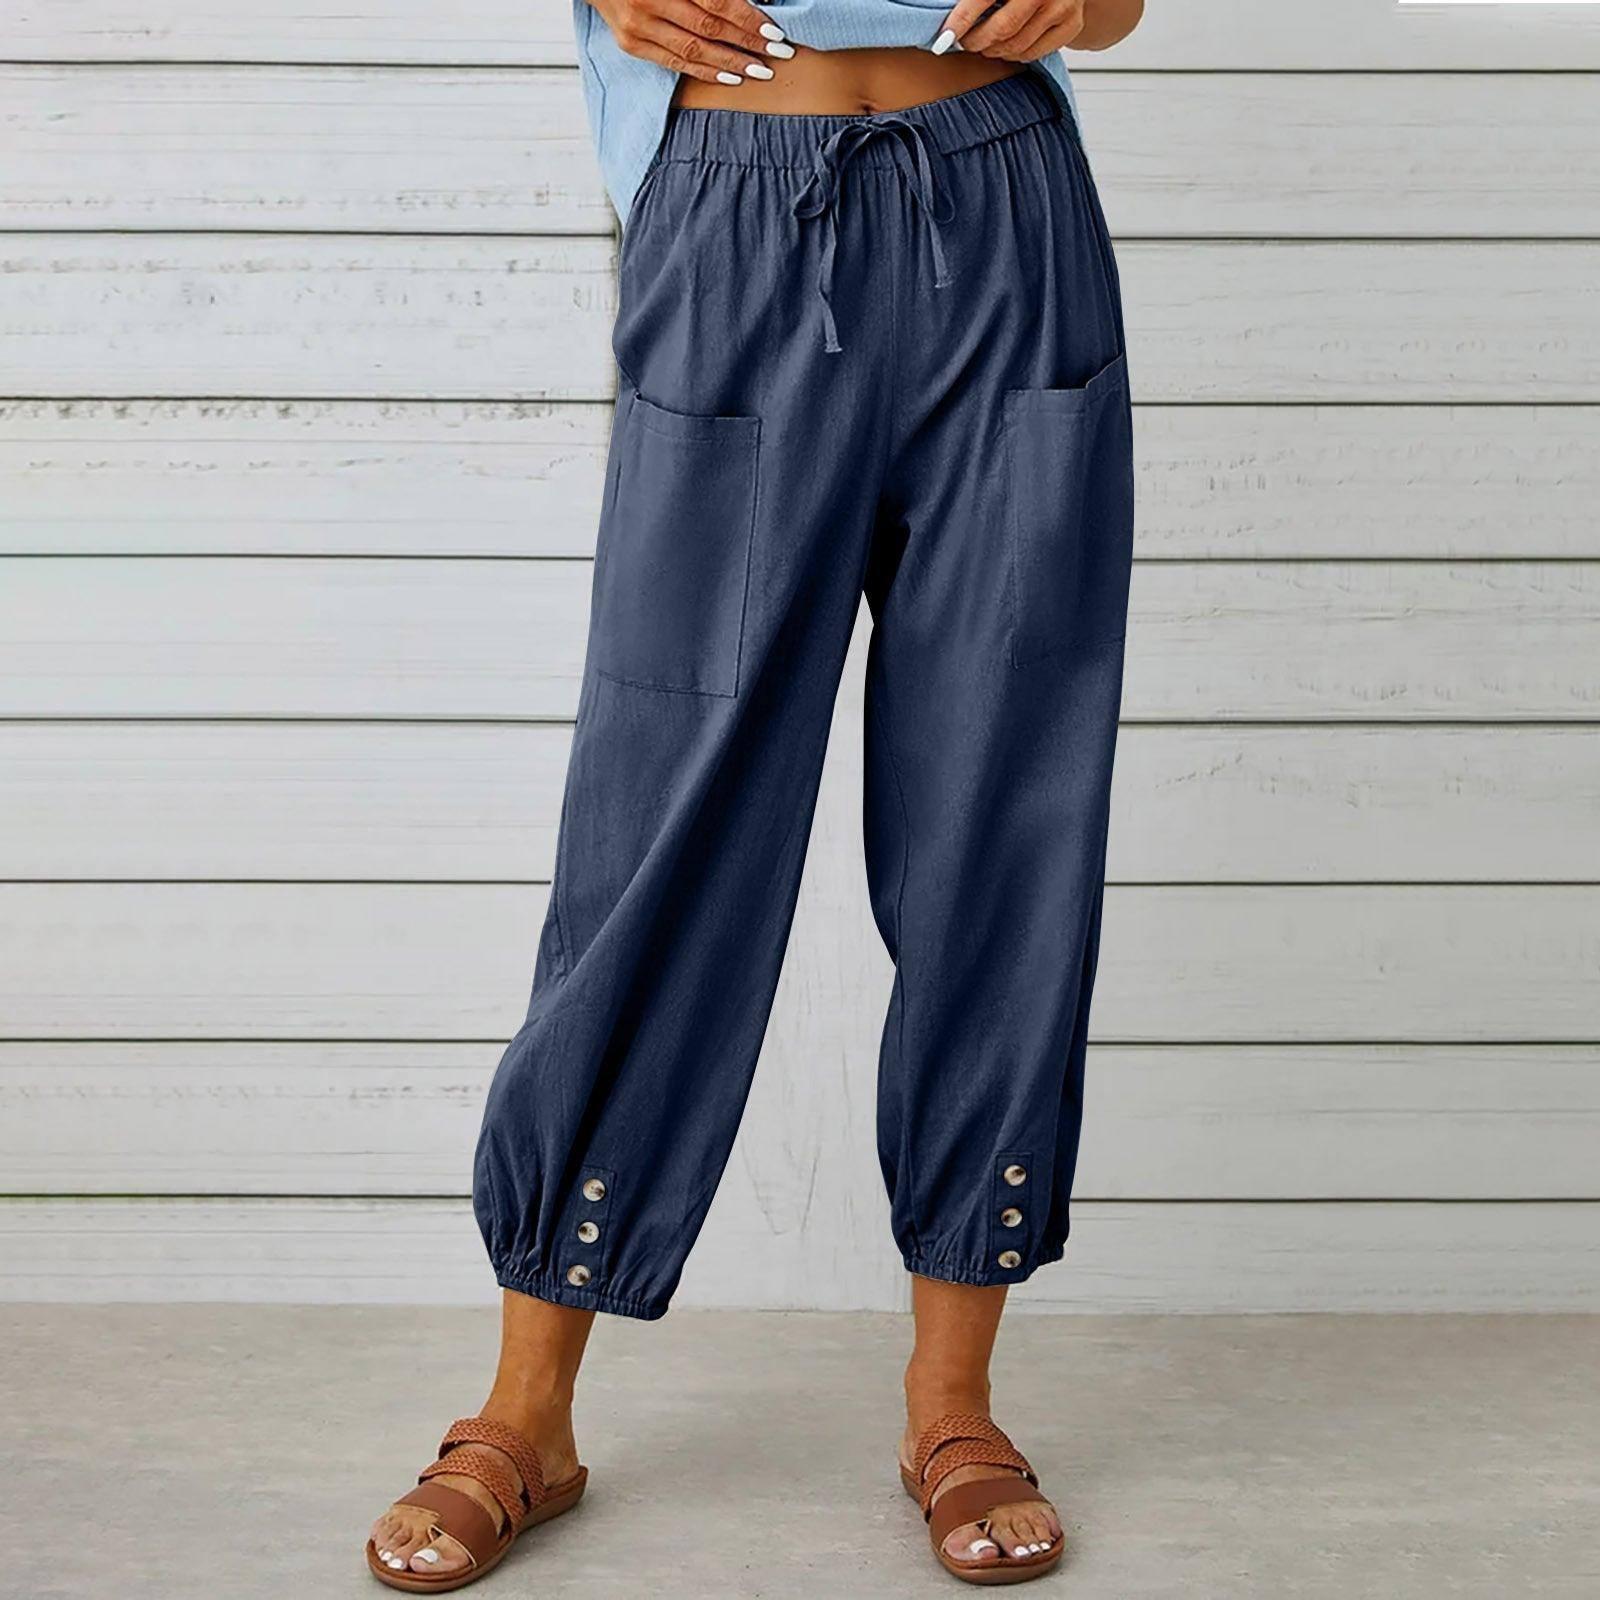 Women Drawstring Tie Pants Spring Summer Cotton And Linen-Navy Blue-10